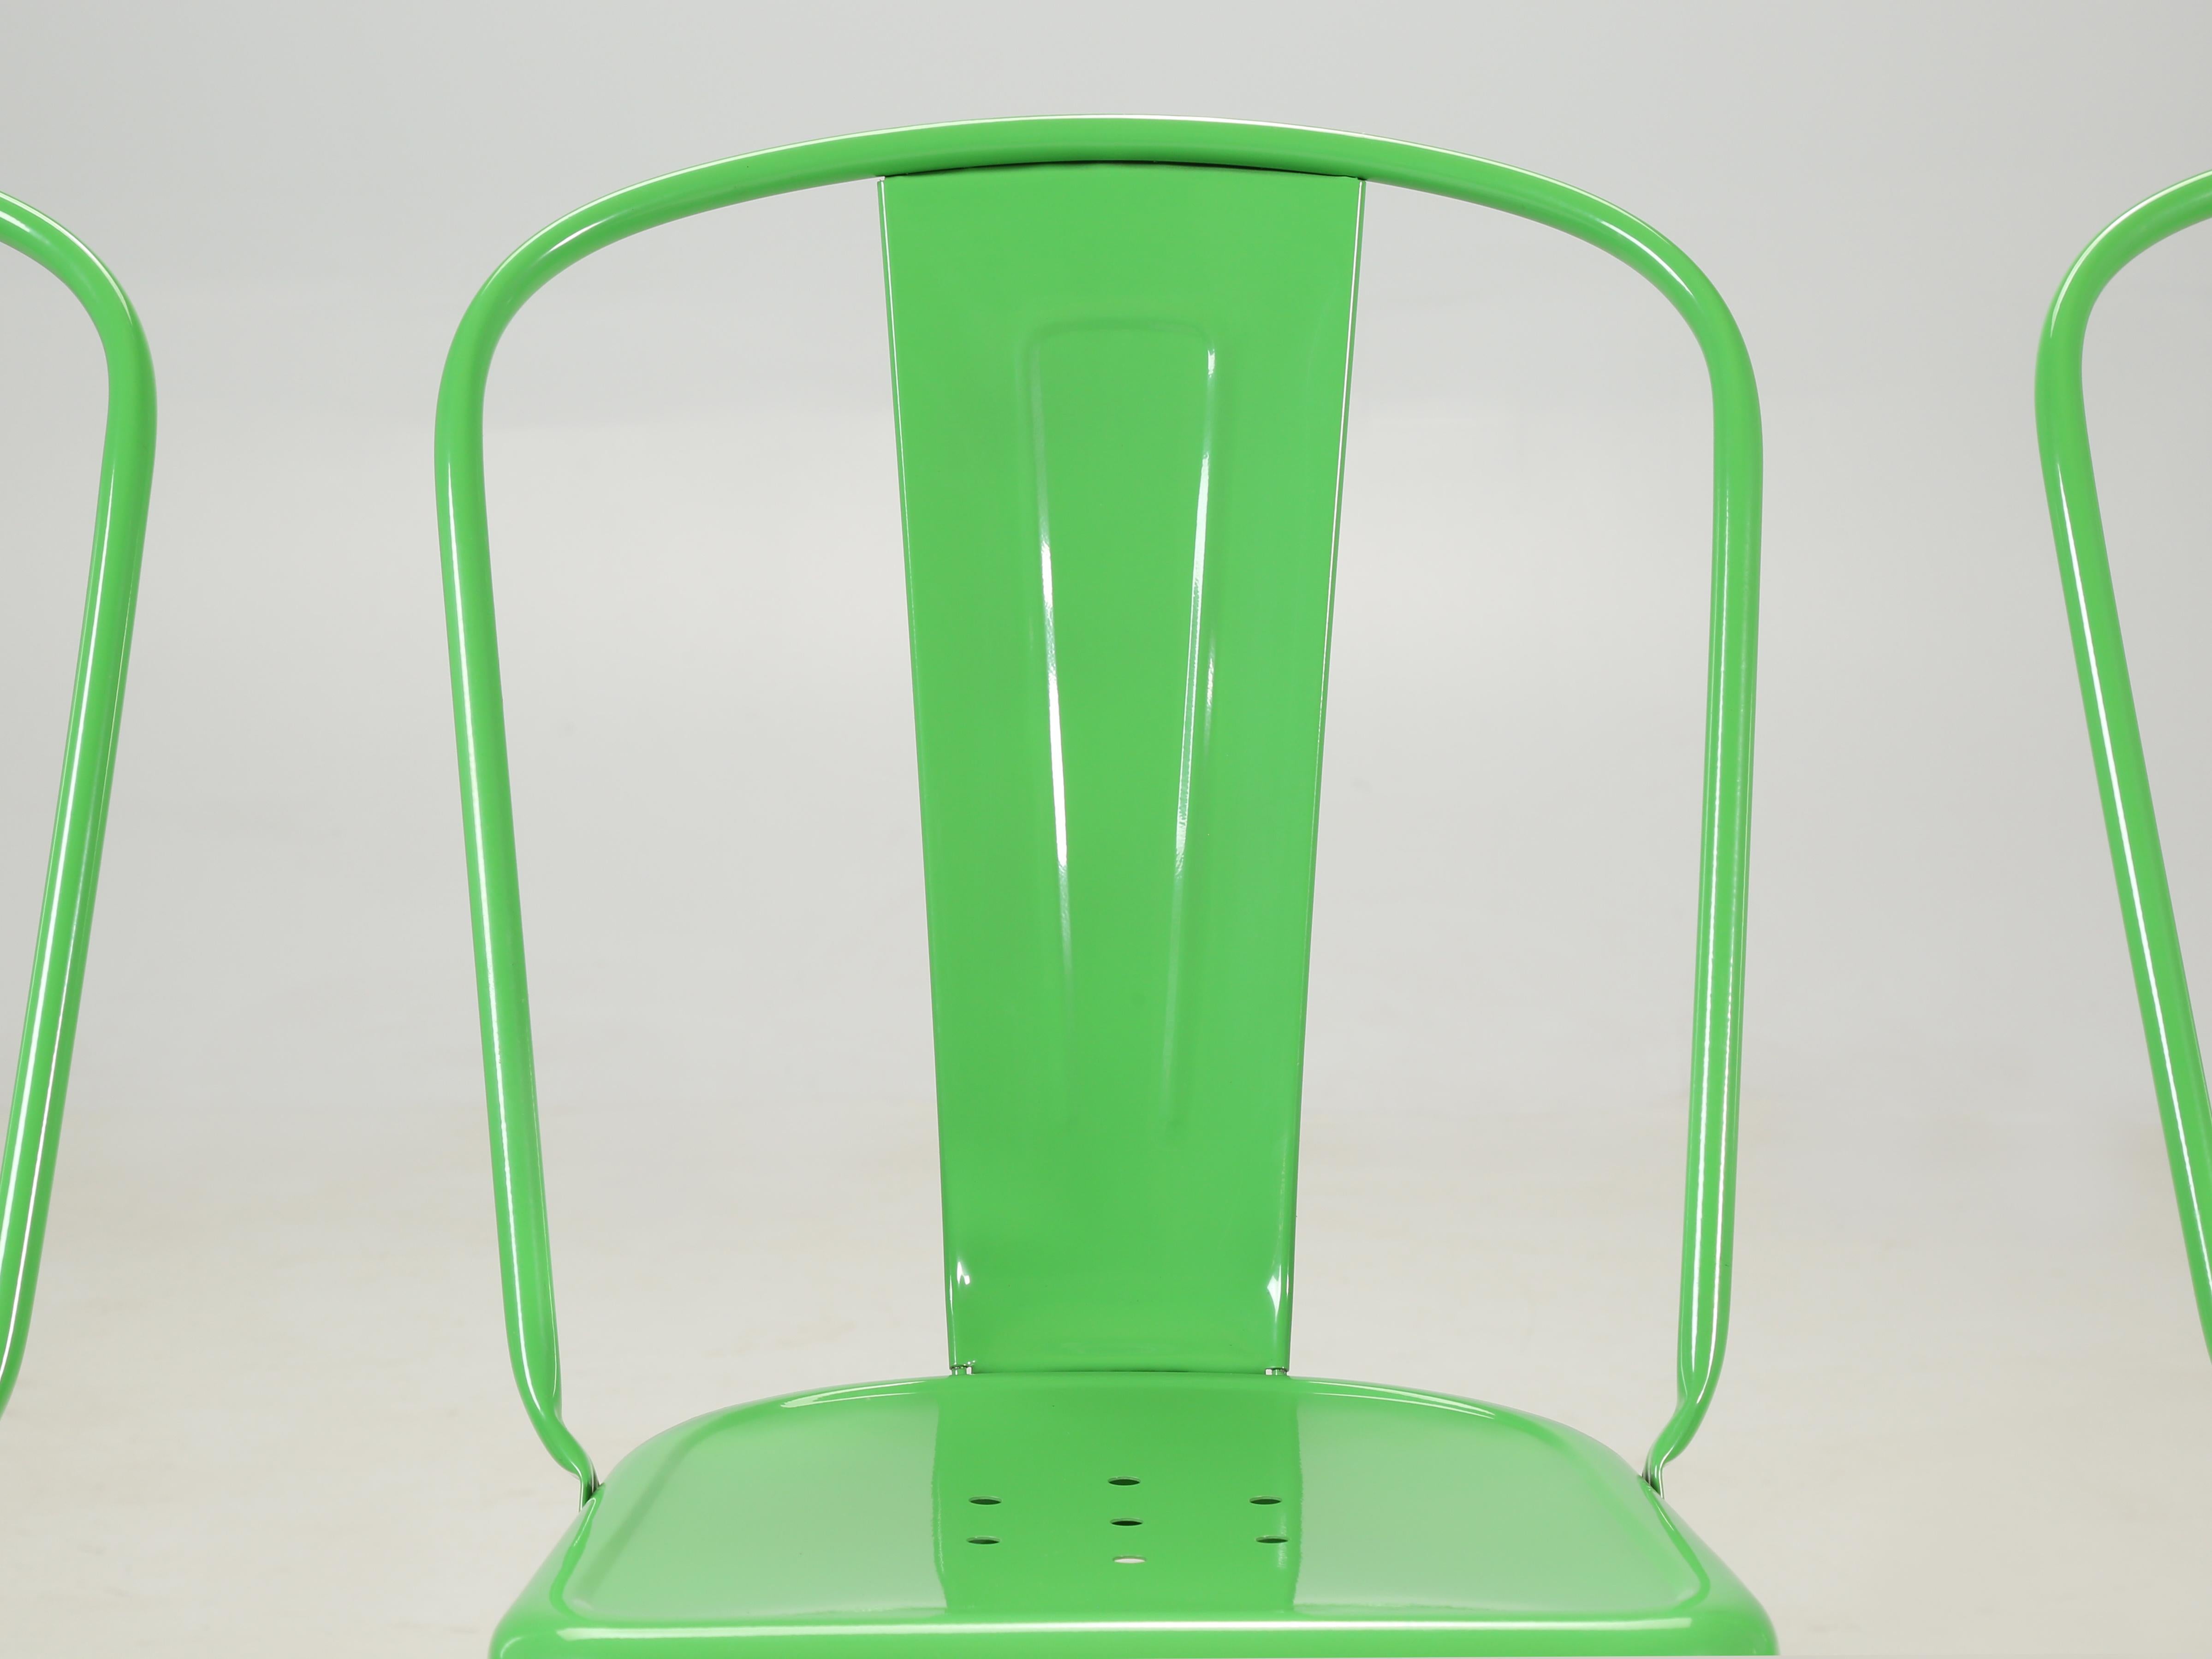 Genuine French Bright Green Tolix Set '6' Steel Chairs, Cosmetic Flaws In Good Condition For Sale In Chicago, IL